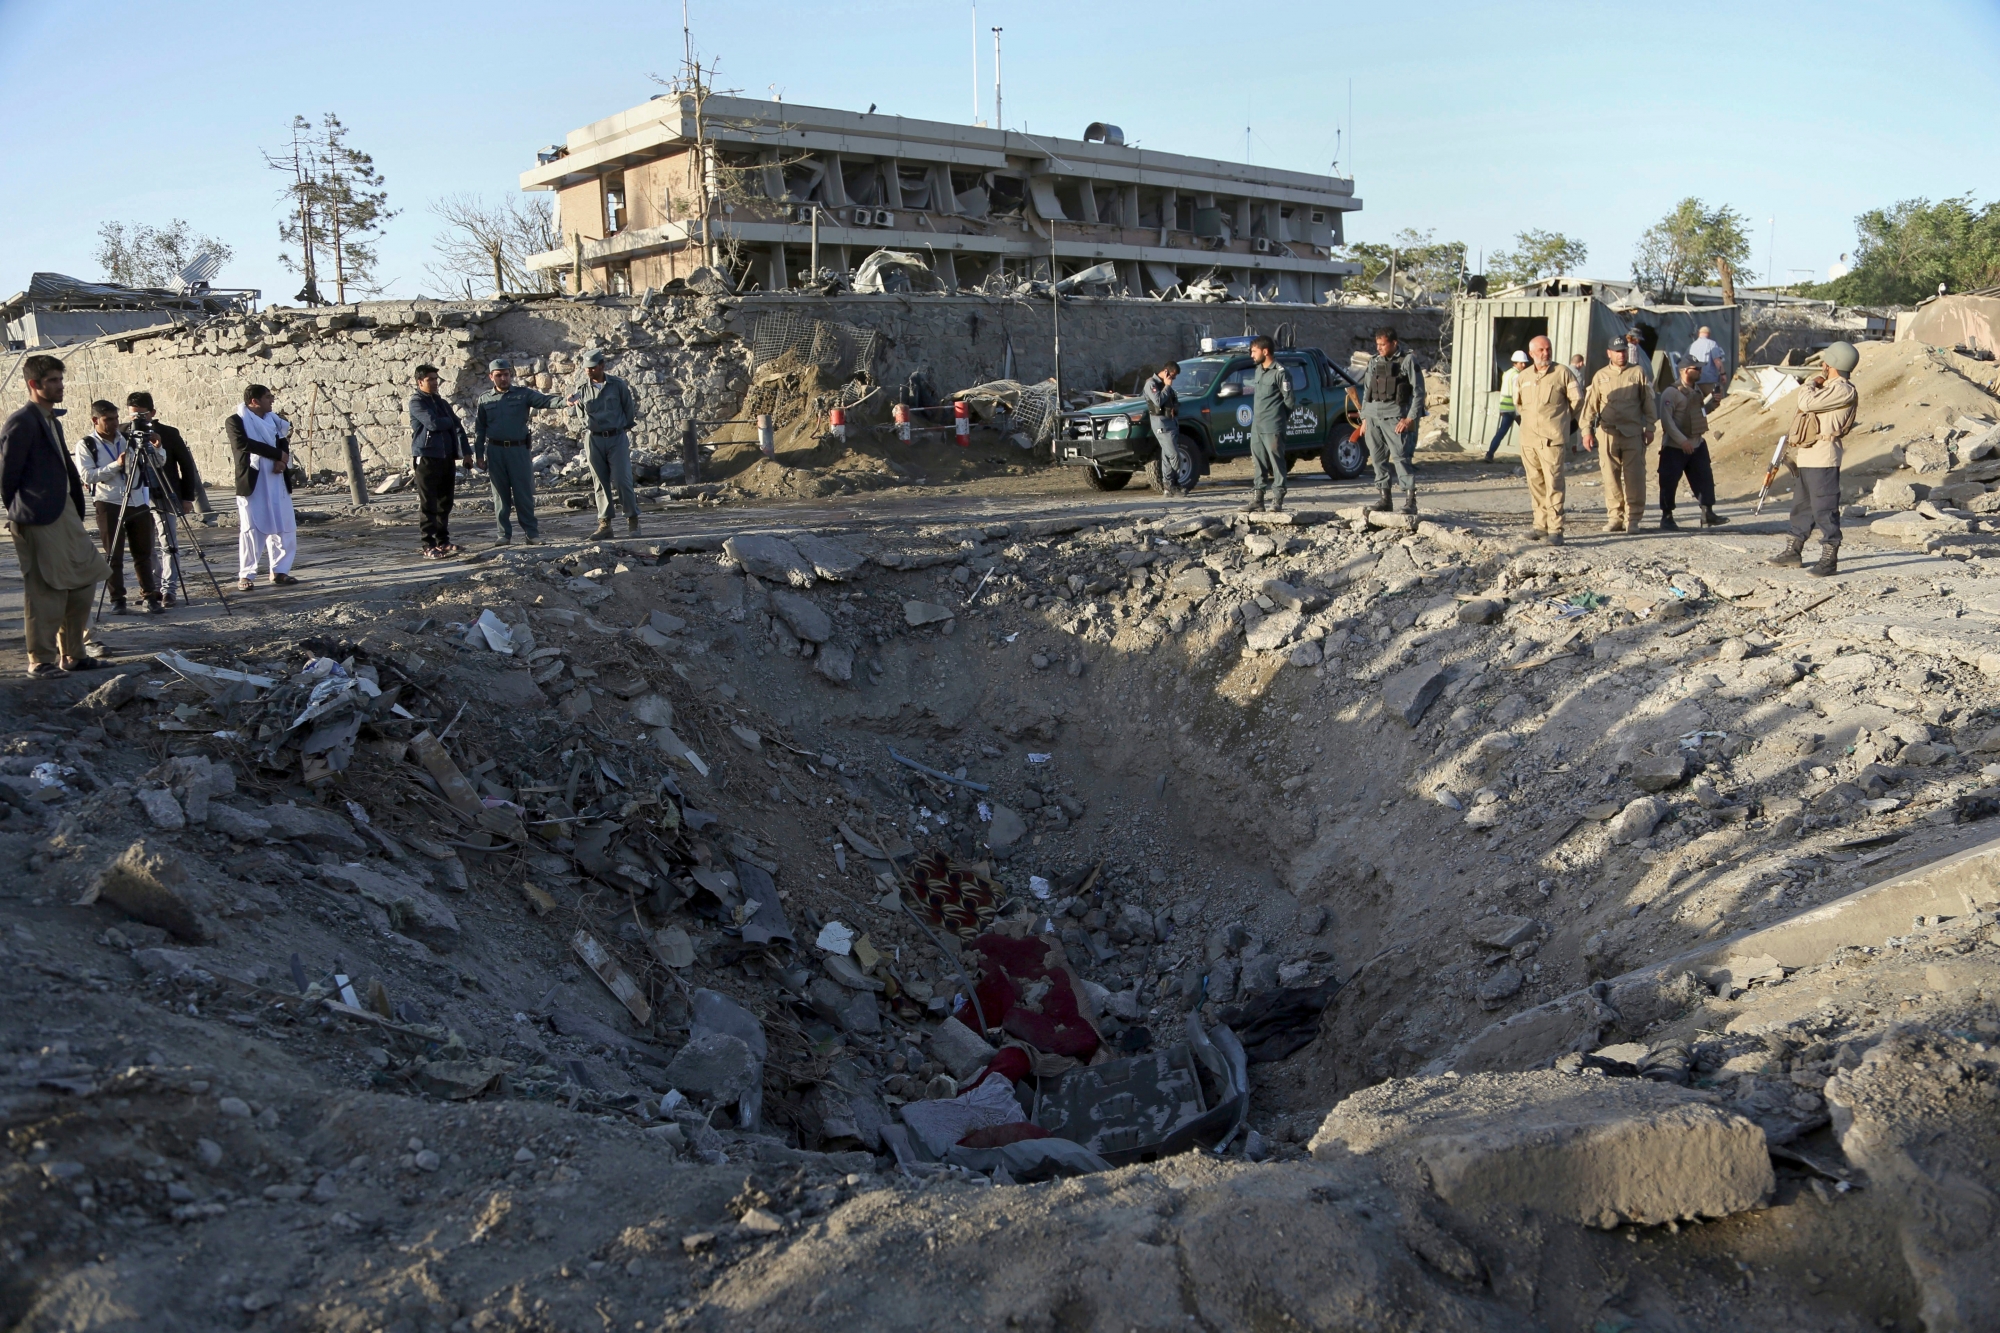 Security forces stand next to a crater created by massive explosion in front of the German Embassy in Kabul, Afghanistan, Wednesday, May 31, 2017. The suicide truck bomb hit a highly secure diplomatic area of Kabul killing scores of people and wounding hundreds more. (AP Photo/Rahmat Gul) Afghanistan